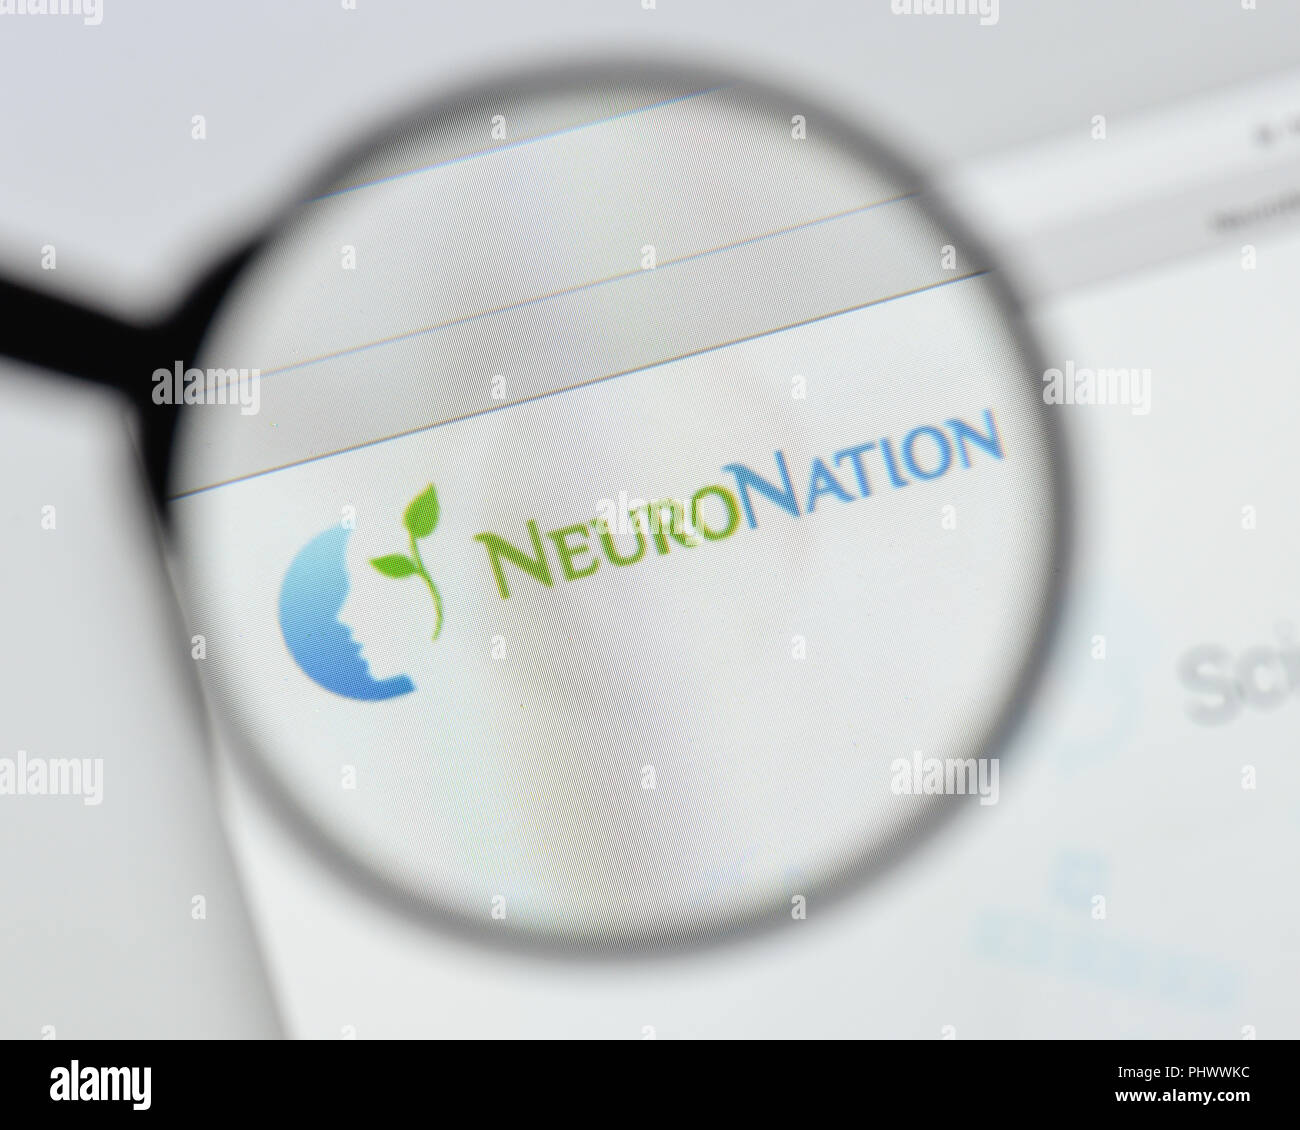 Milan, Italy - August 20, 2018: neuro nation website homepage. neuro nation logo visible. Stock Photo